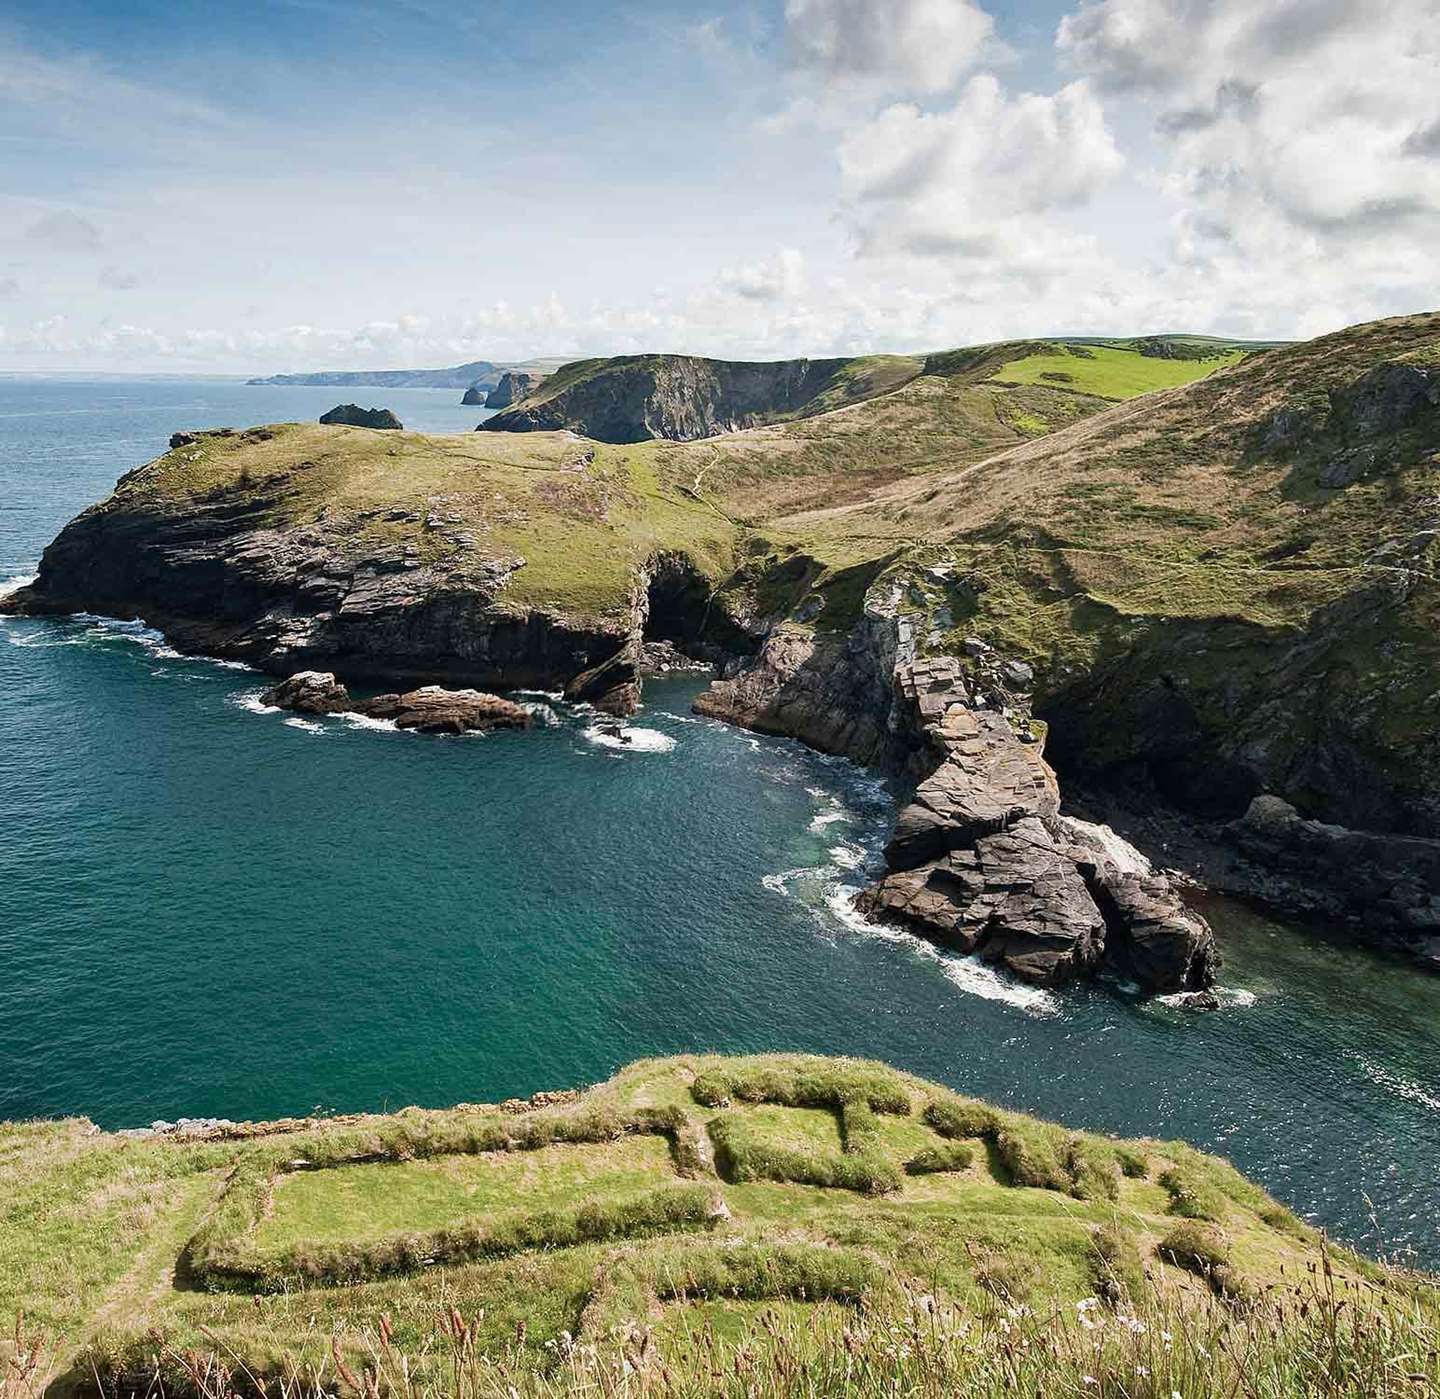 The early settlement remains on the eastern slopes of Tintagel island, looking across to the rocky headlands of the Cornish coast. The dramatic landscape was vividly described in Geoffrey of Monmouth’s ‘History of the Kings of Britain’